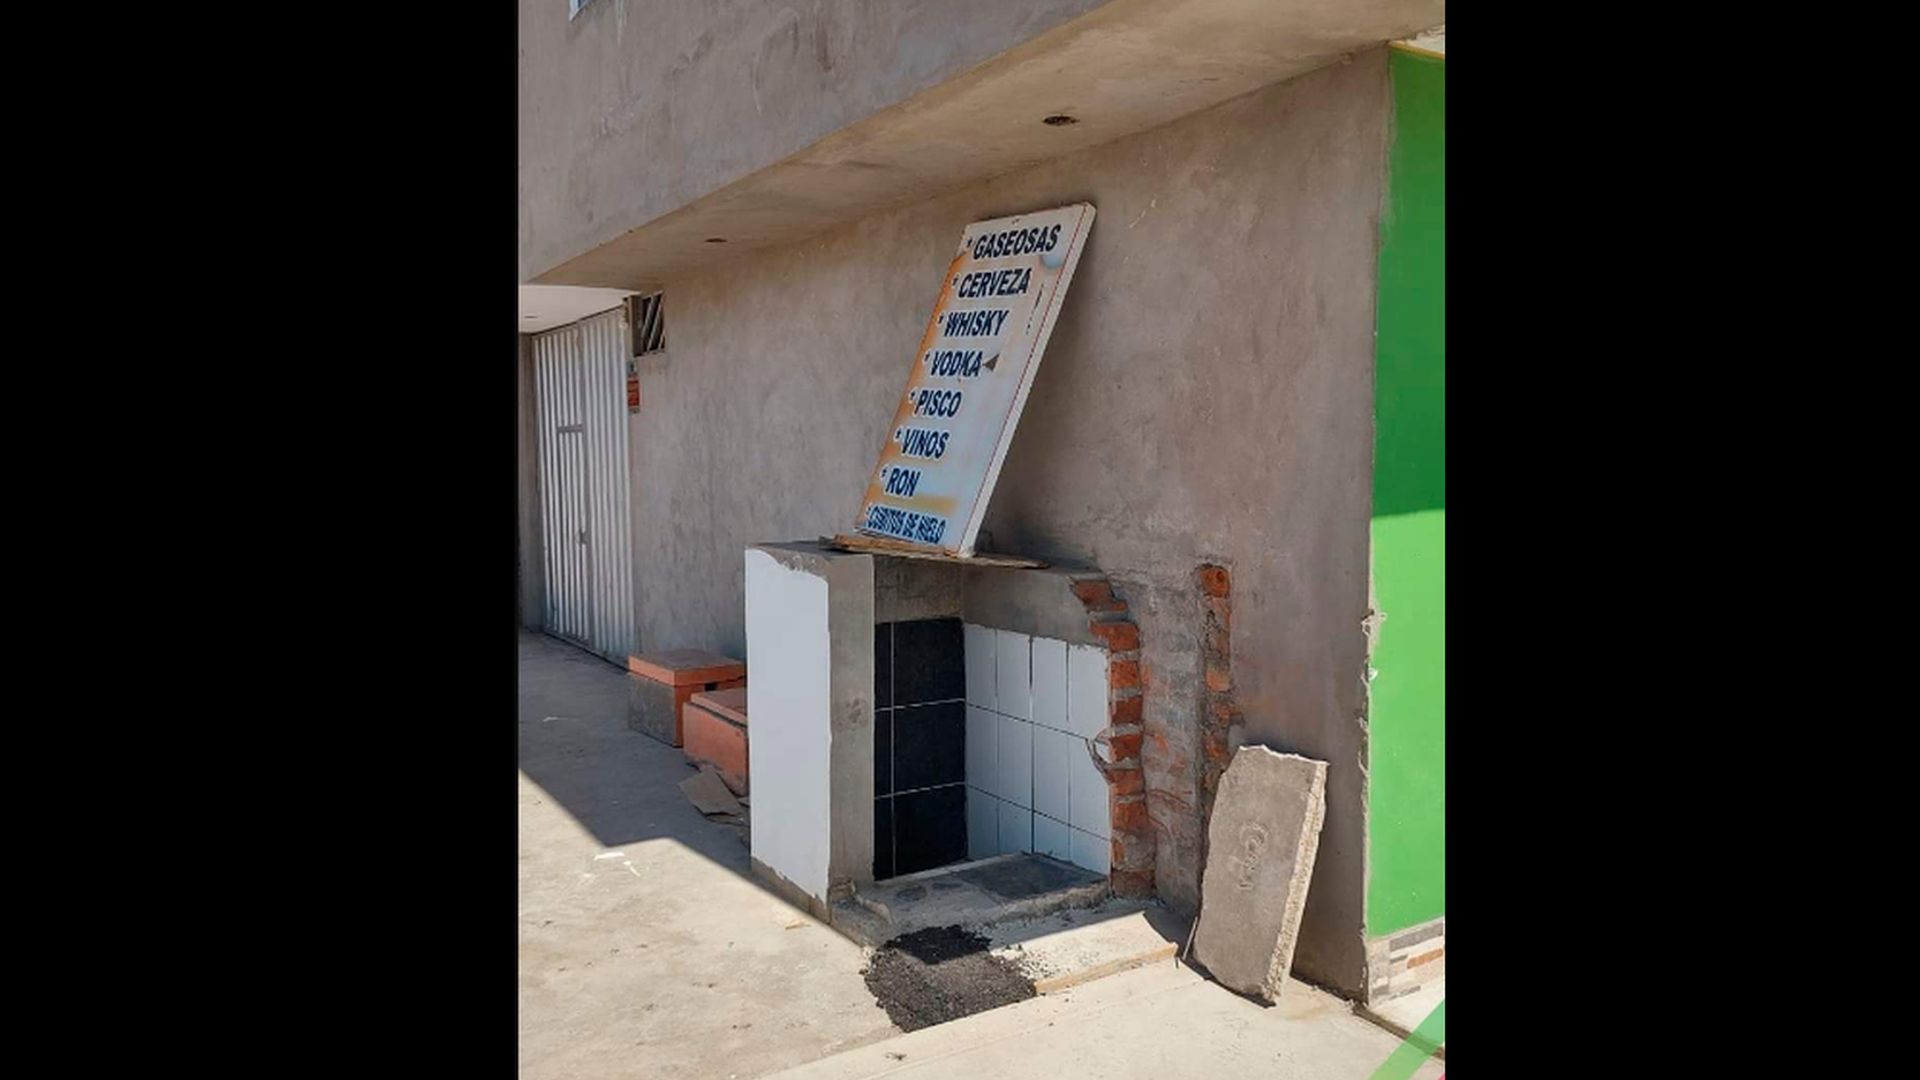 This is the latrine that the enthusiastic trader had illegally installed, in Ica.  (Photo: Municipality of La Tinguiña)